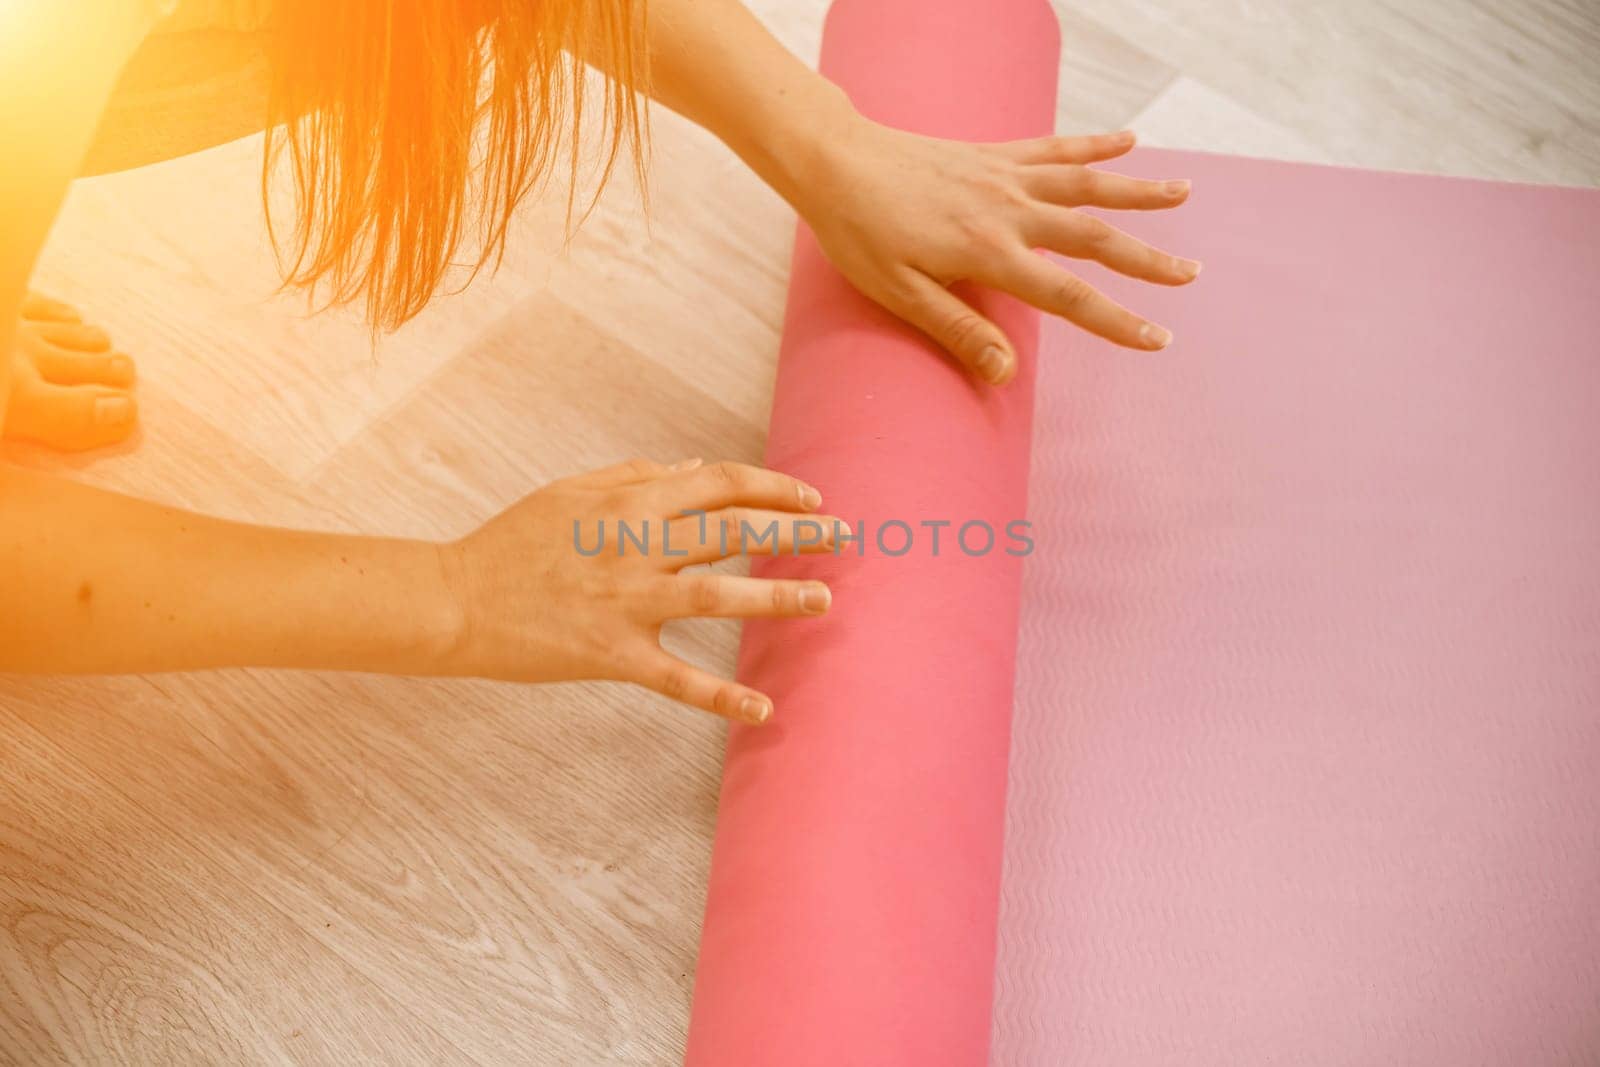 A young woman rolls a pink fitness or yoga mat before or after exercising, exercising at home in the living room or in a yoga studio. Healthy habits, keep fit, weight loss concept. Closeup photo.